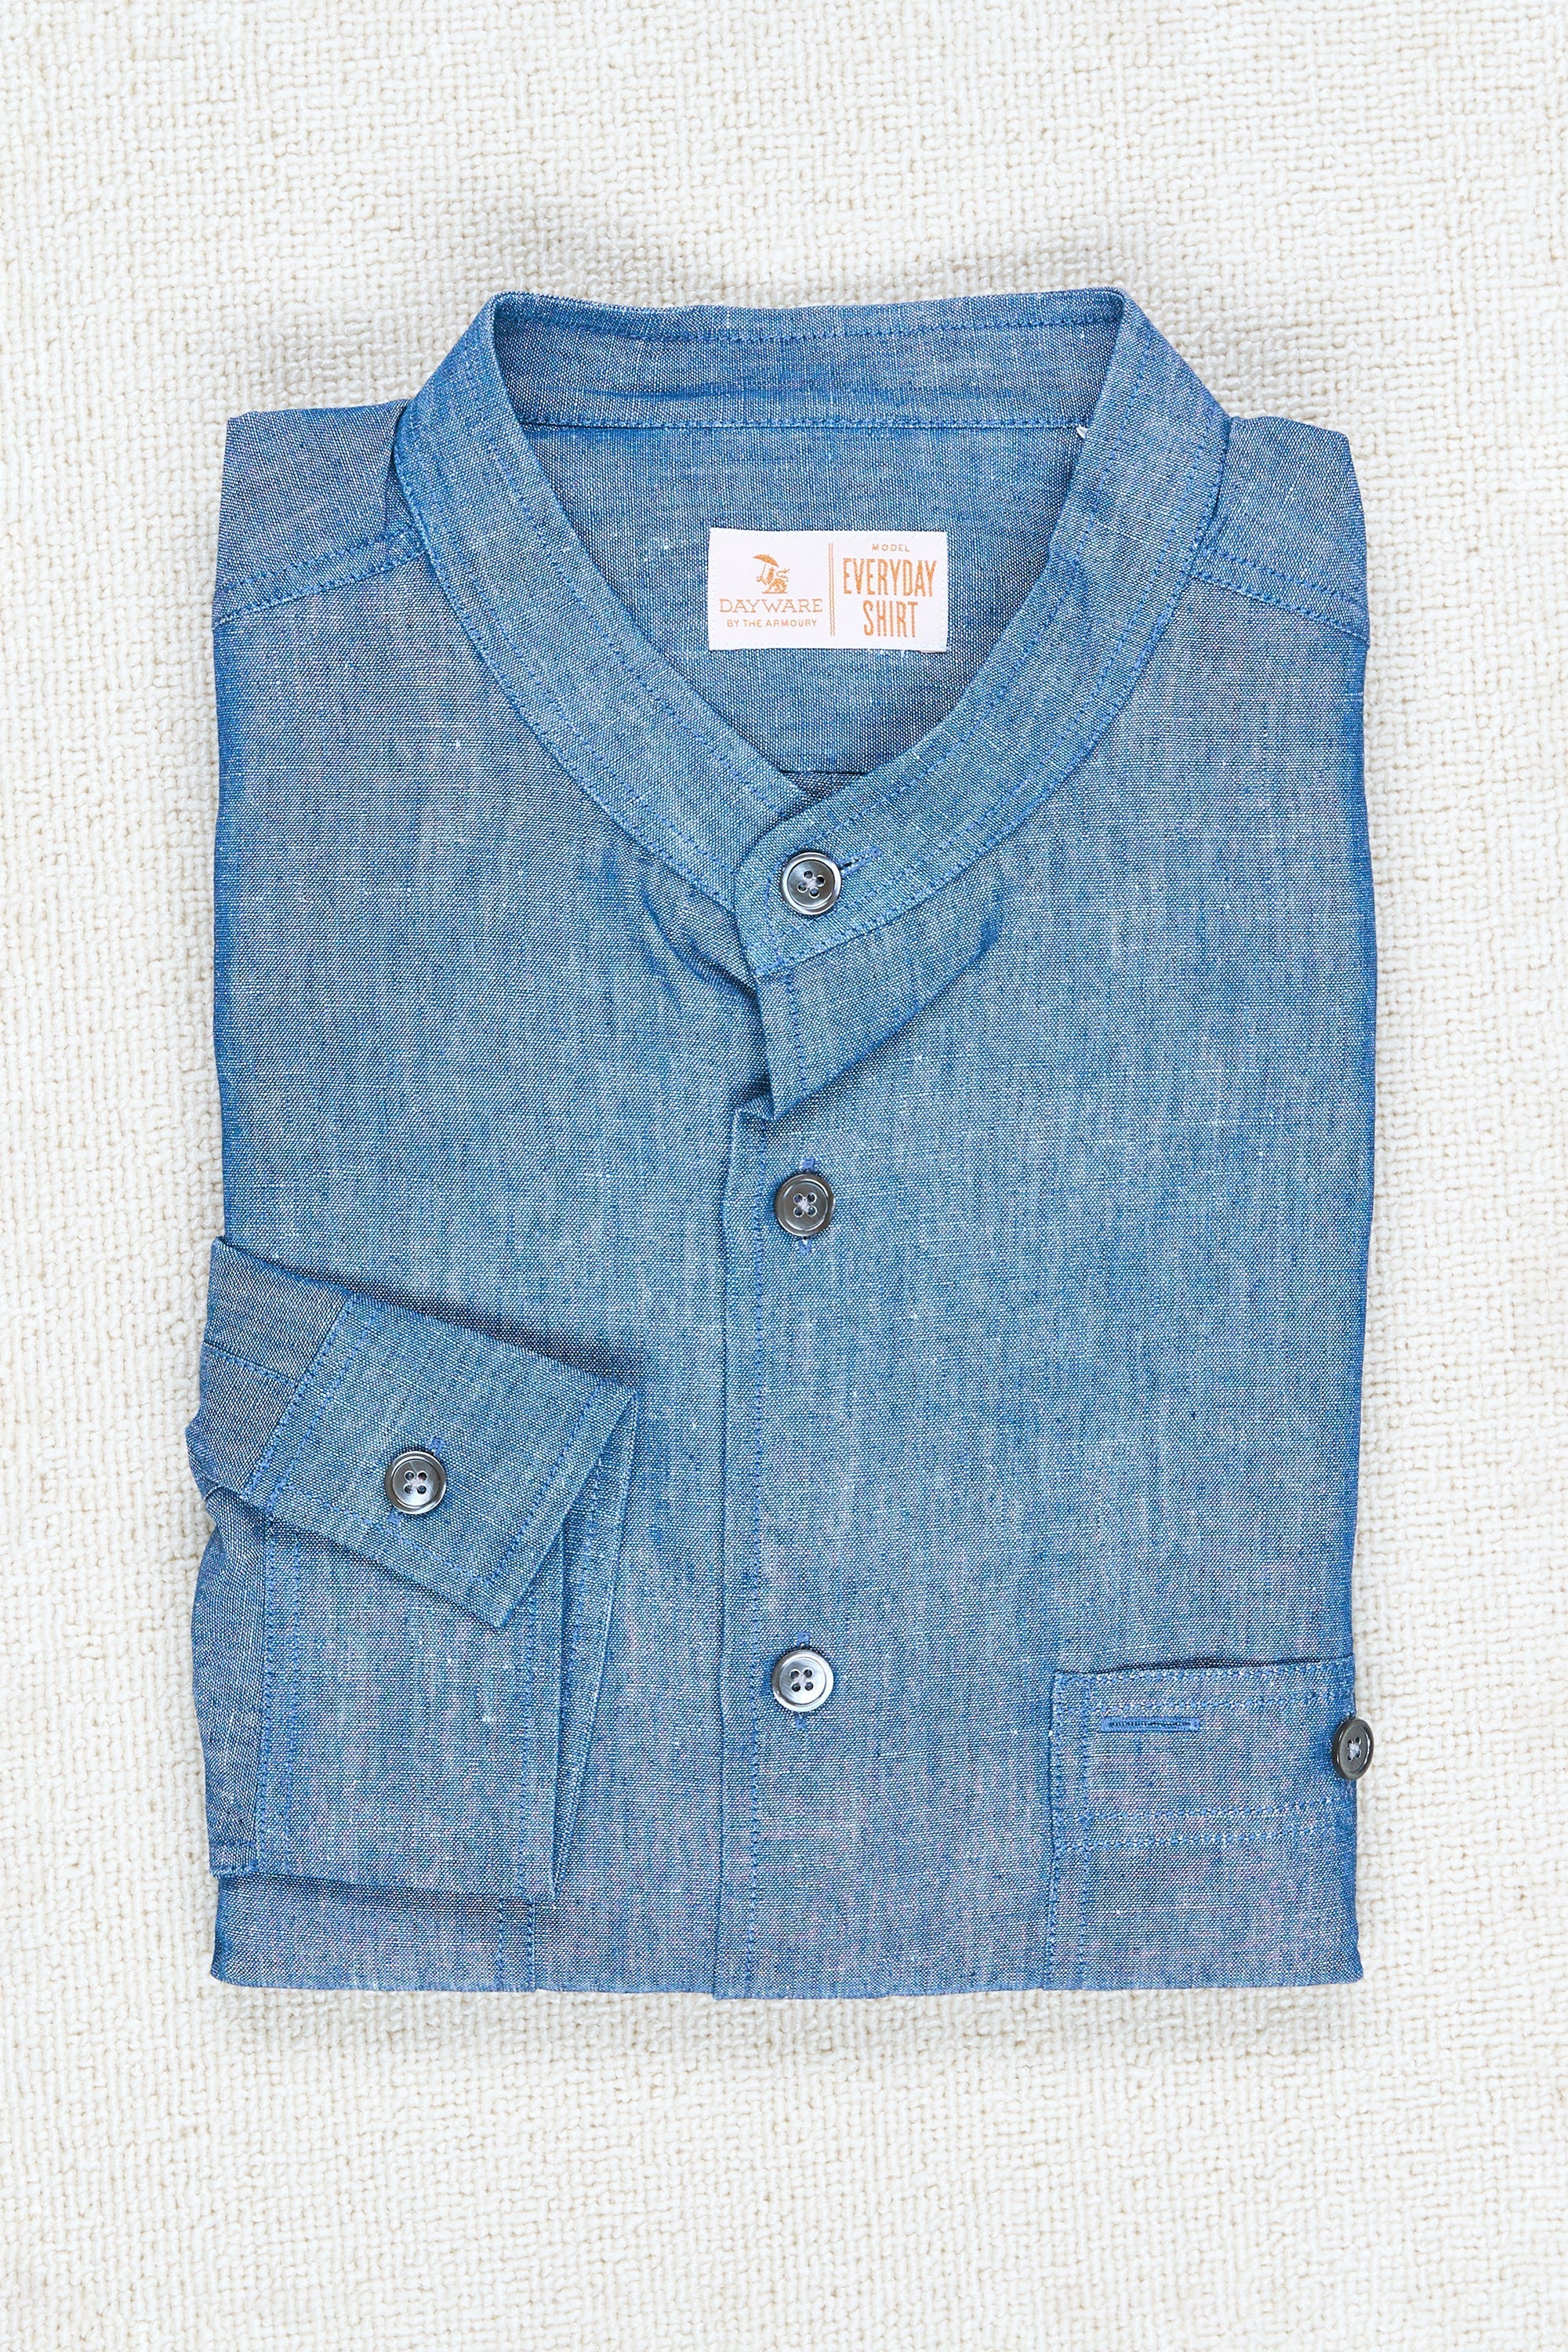 The Armoury Blue Chambray Cotton/Linen Everyday Shirt